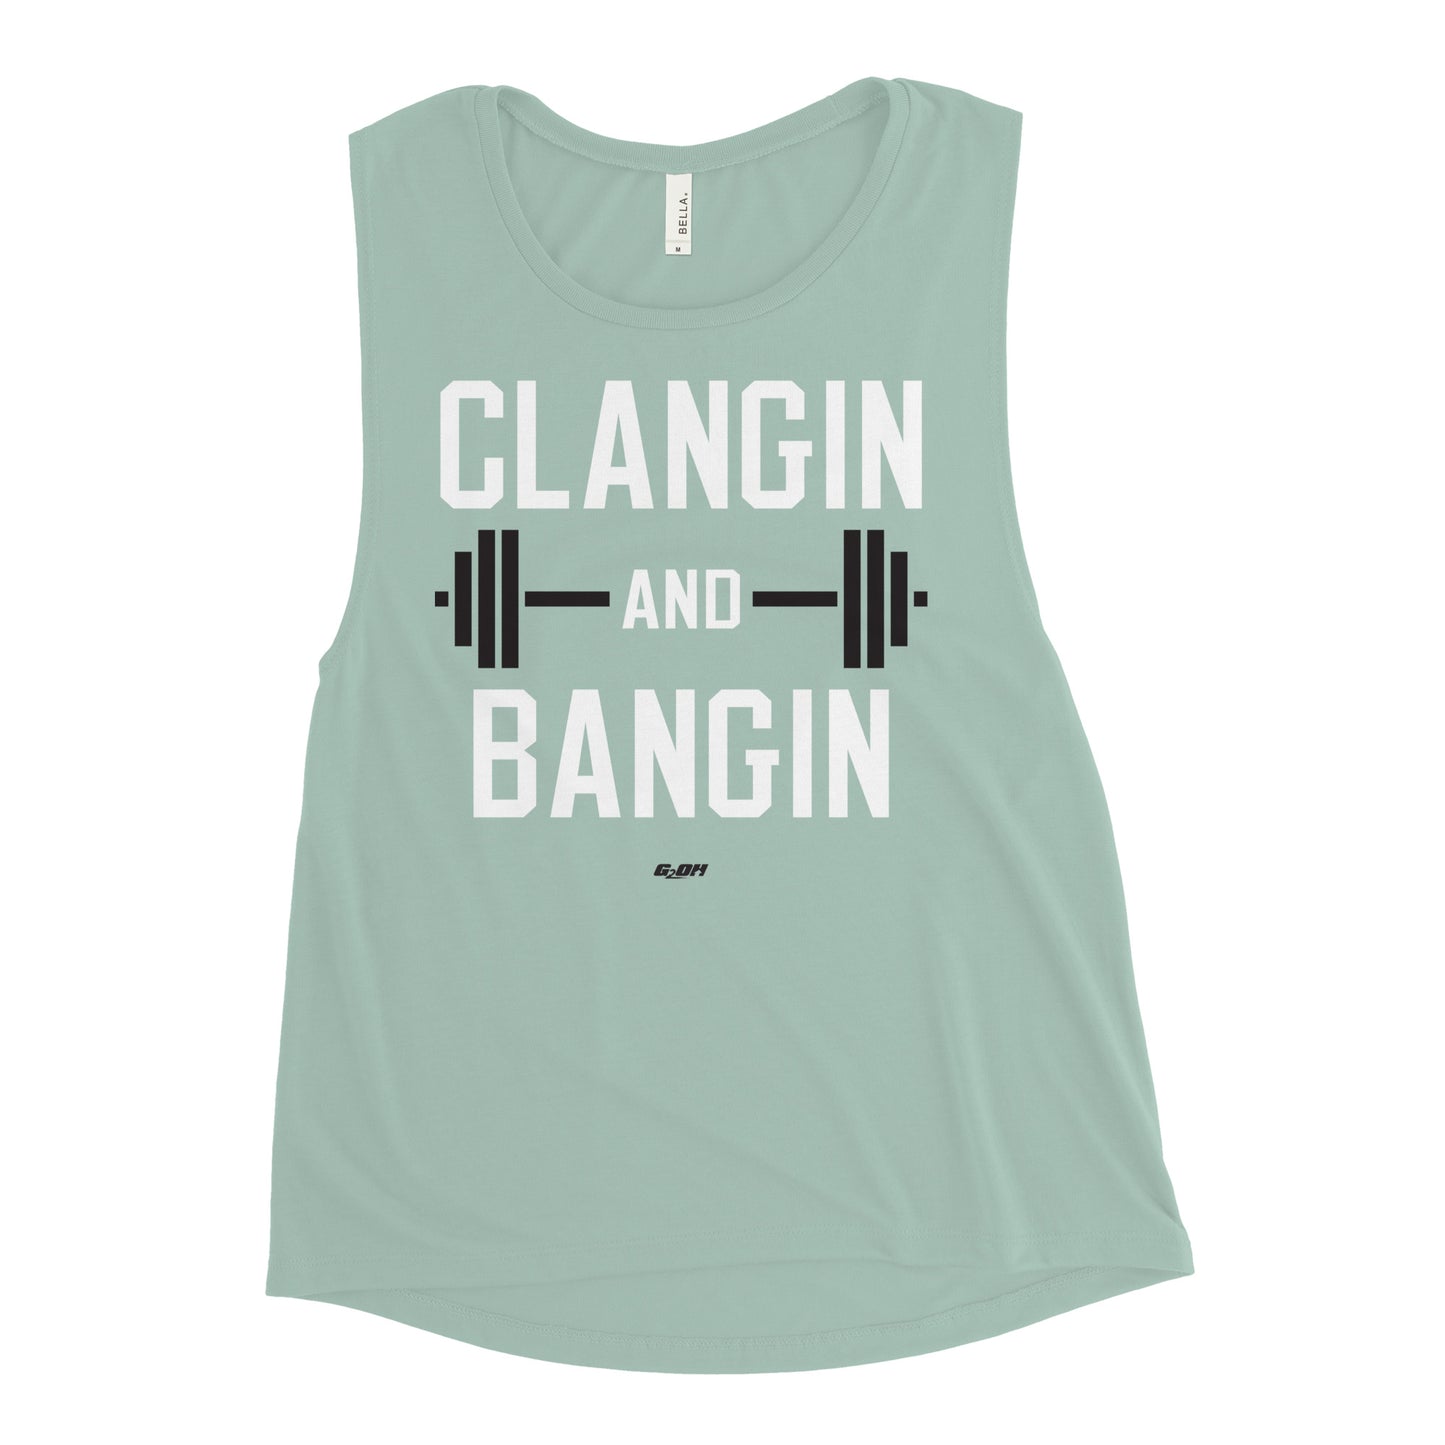 Clangin' And Bangin' Women's Muscle Tank